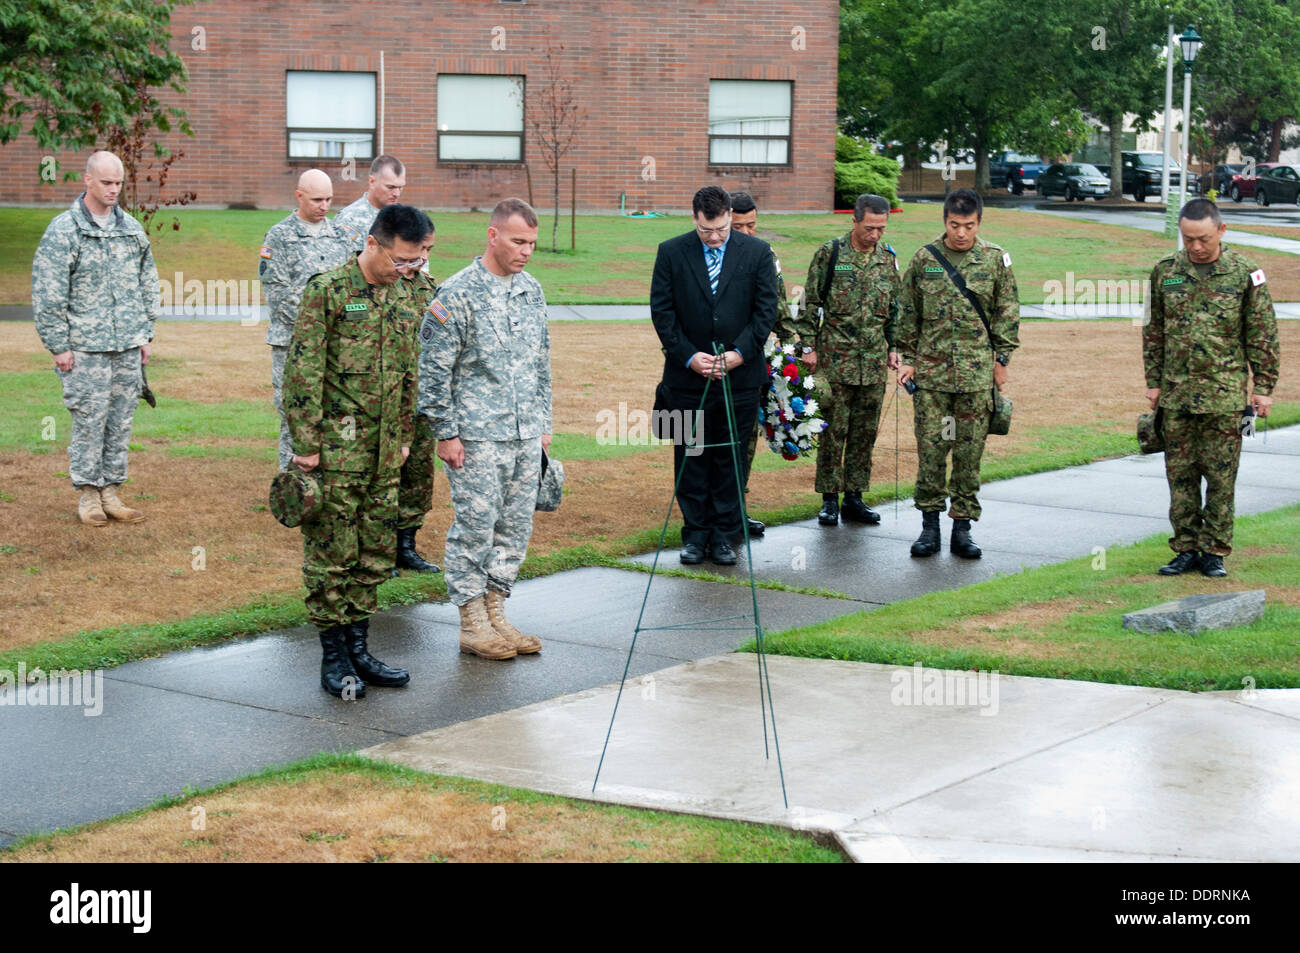 Maj. Gen. Omori (left), deputy commanding general, 4th Division, Northern Army, Japanese Ground Self-Defense Force, bows his head in a moment of silence alongside Col. Hugh D. Bair, commander, 3rd Stryker Brigade Combat Team, 2nd Infantry Division, at a w Stock Photo